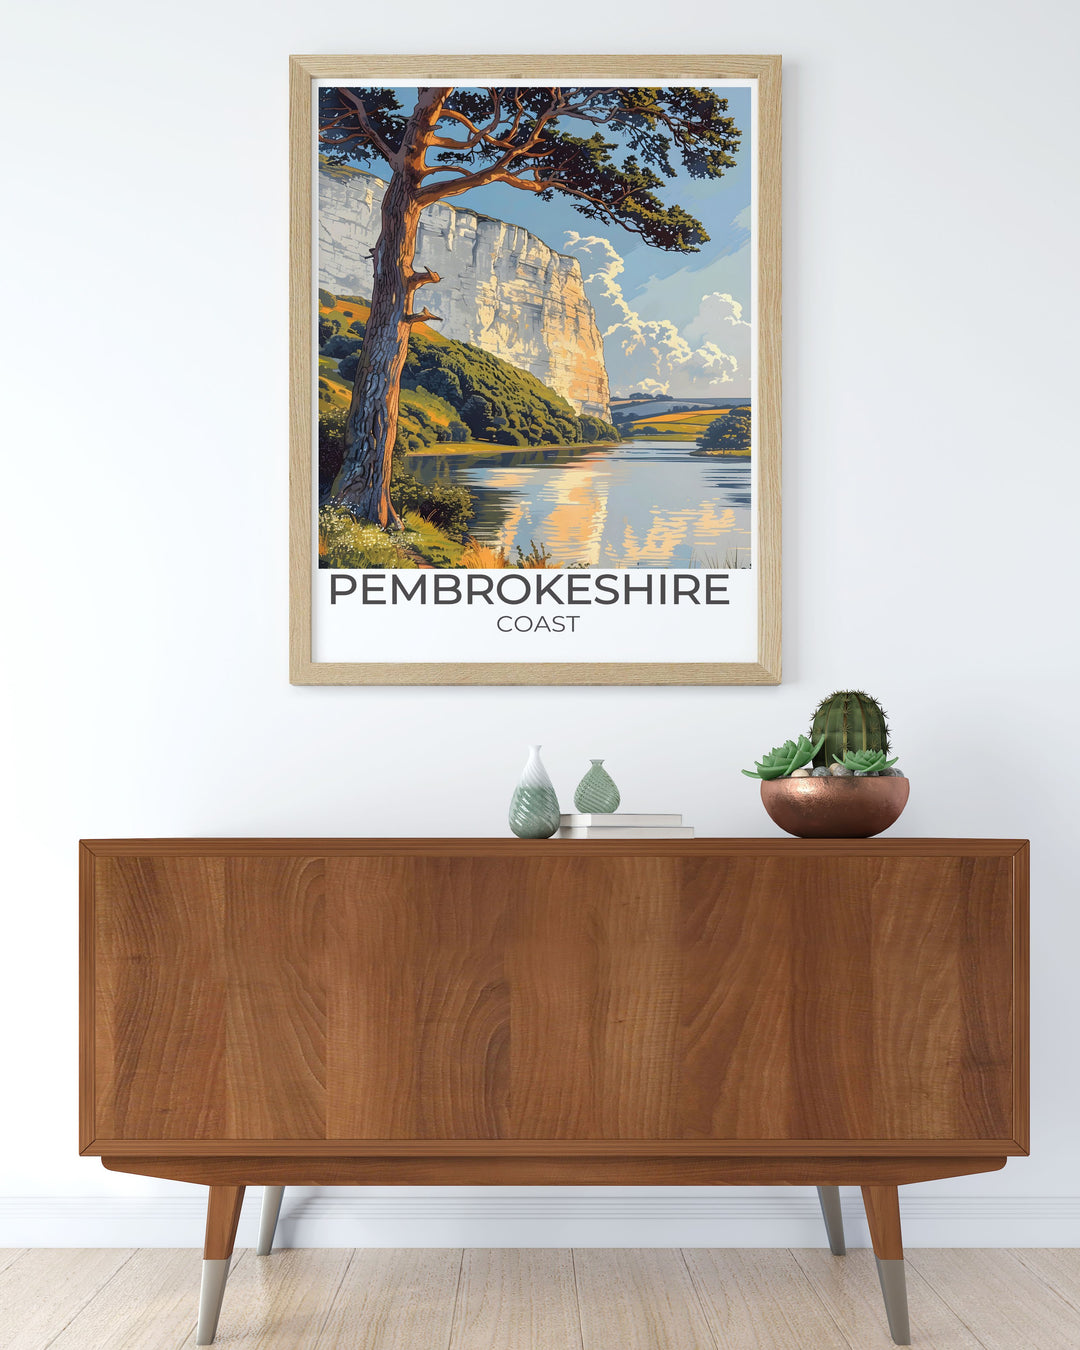 Pembrokeshire Coast travel poster featuring Stackpole Estate in a vintage style capturing the essence of this iconic location with dramatic cliffs and breathtaking views ideal for lovers of nature and vintage travel prints.